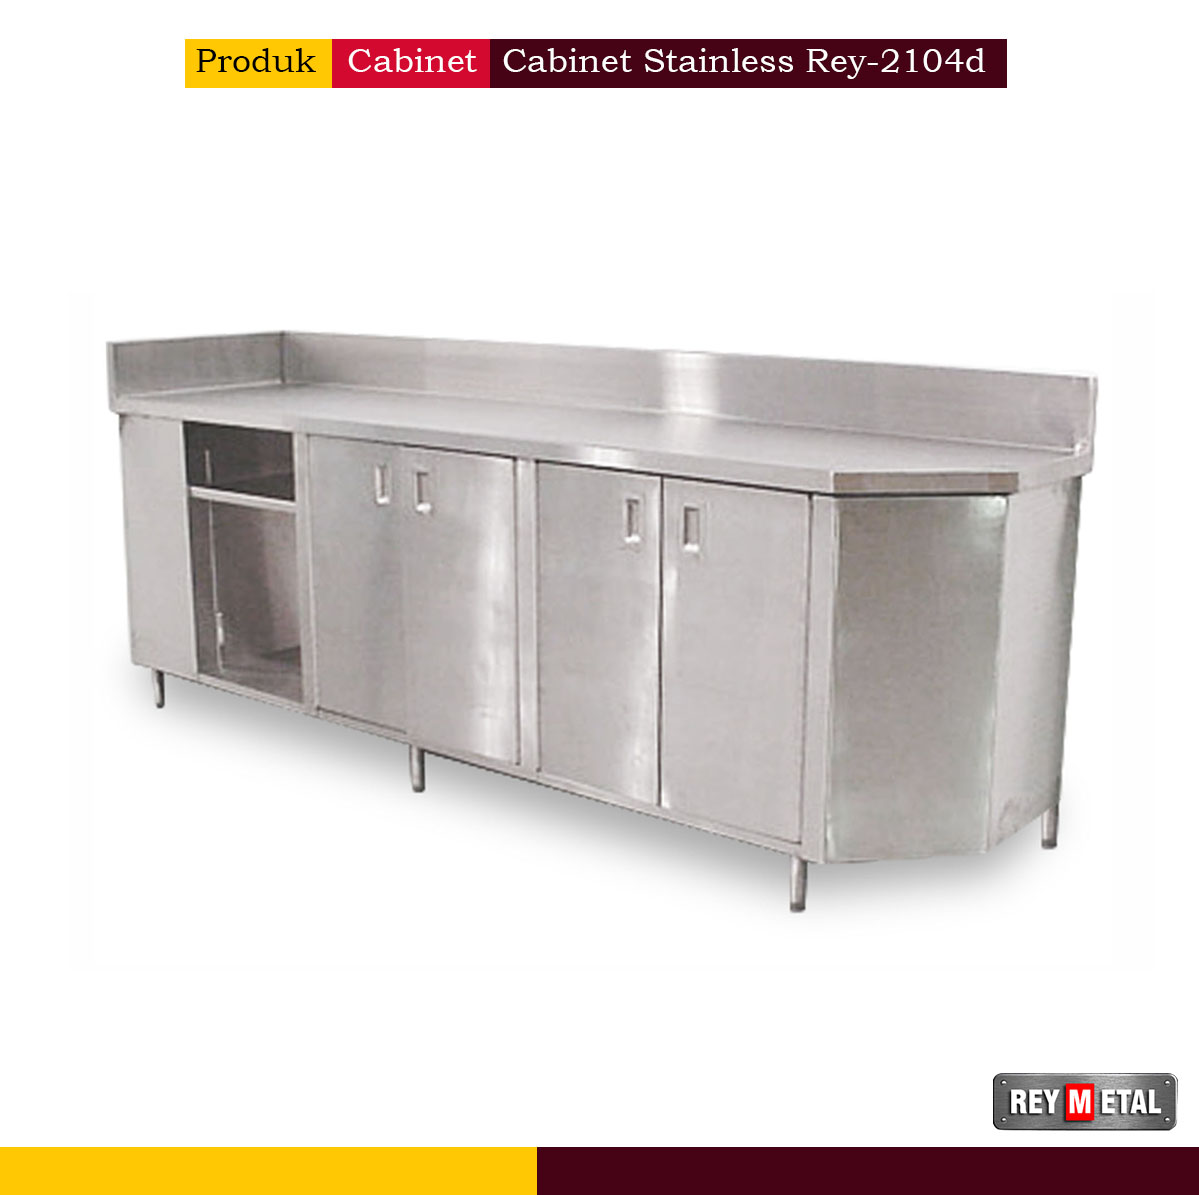 Cabinet Stainless Rey 2104d